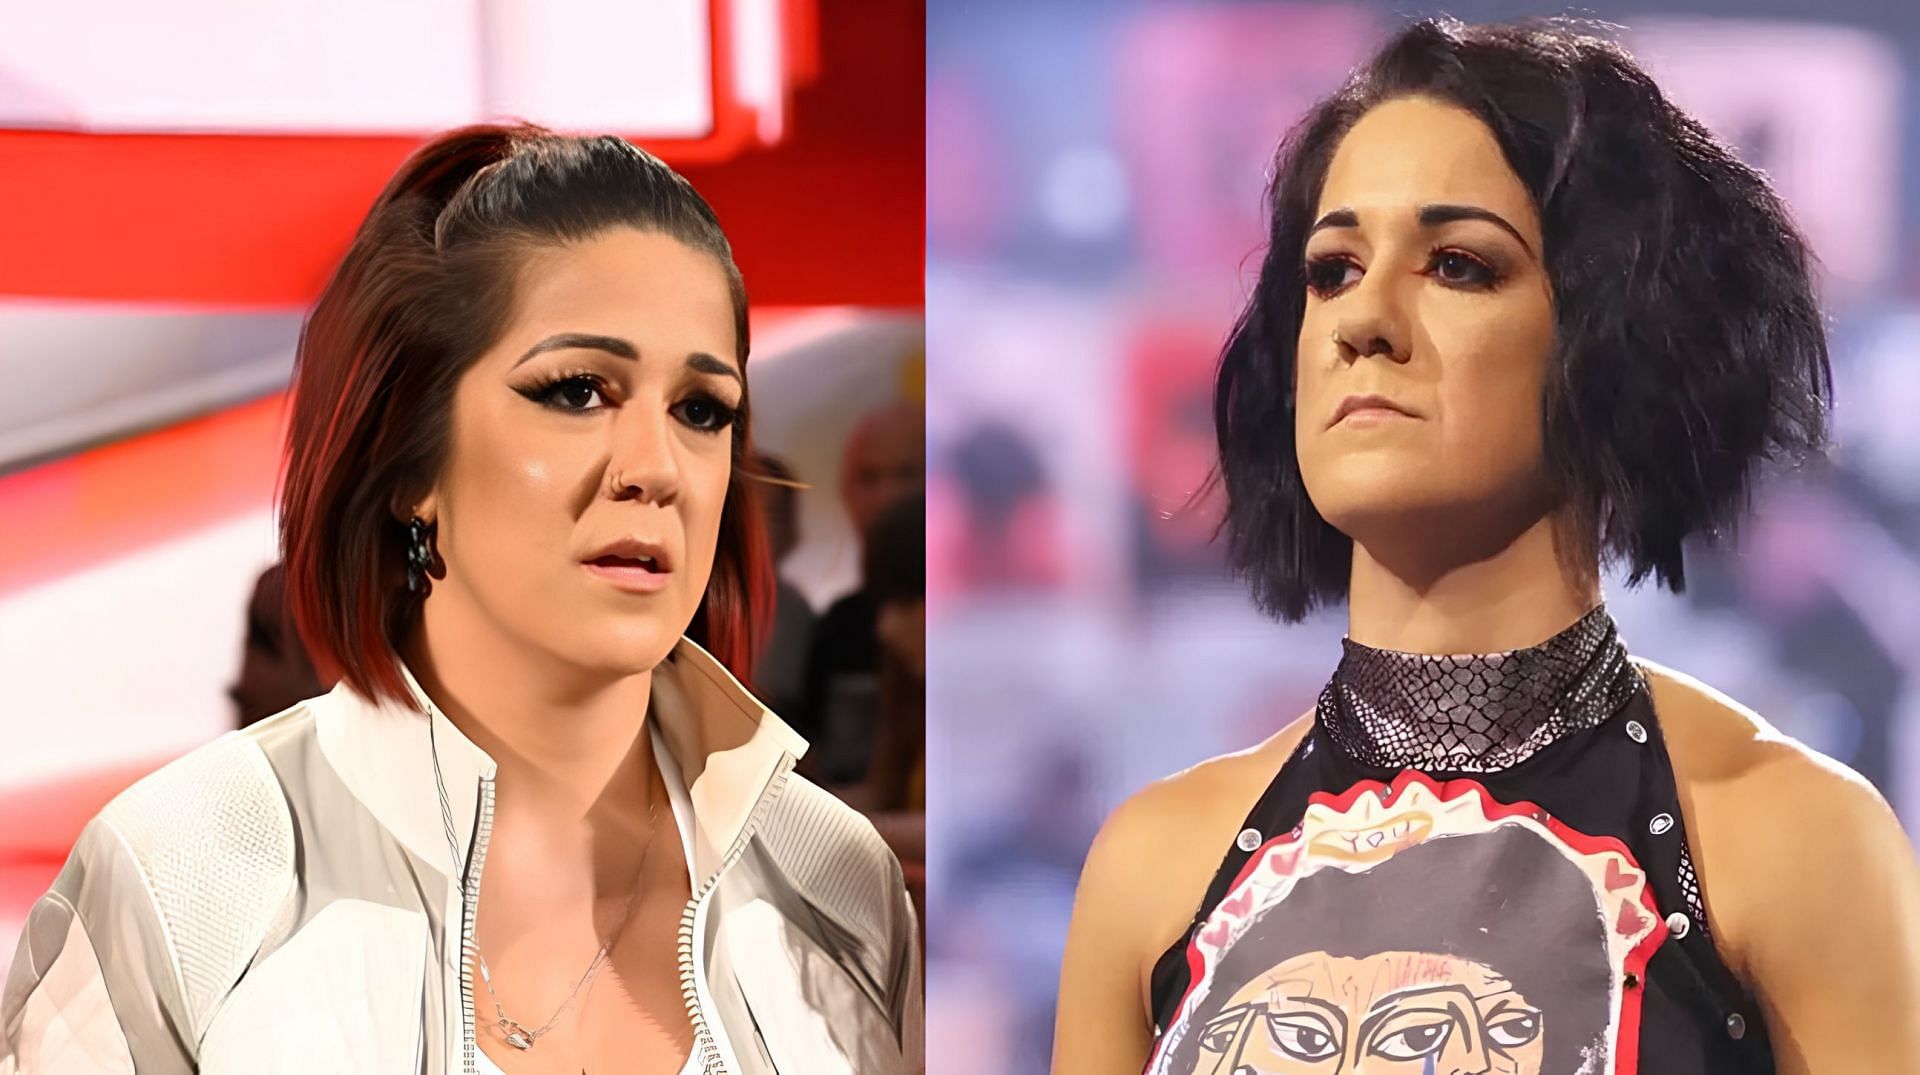 Bayley is a member of the Damage CTRL faction 